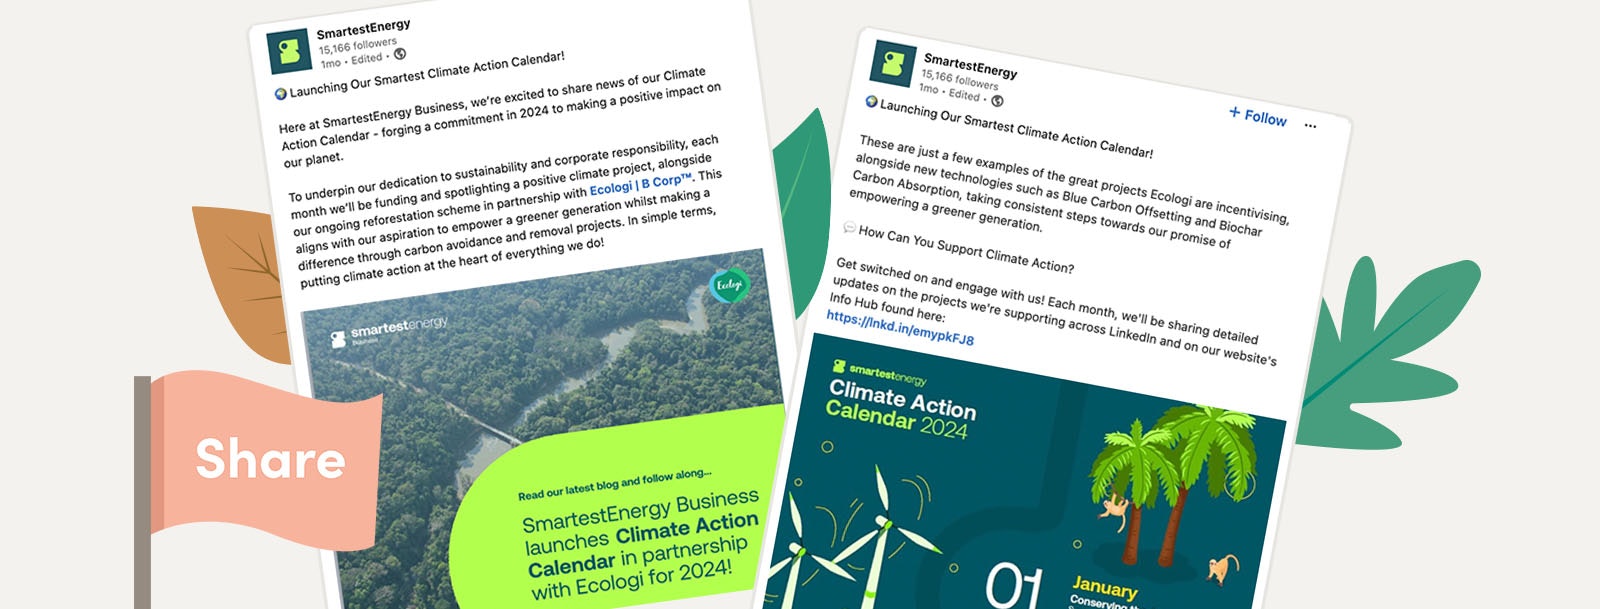 Examples of social posts from SmartestEnergy Business introducing their Smartest Climate Action Calendar